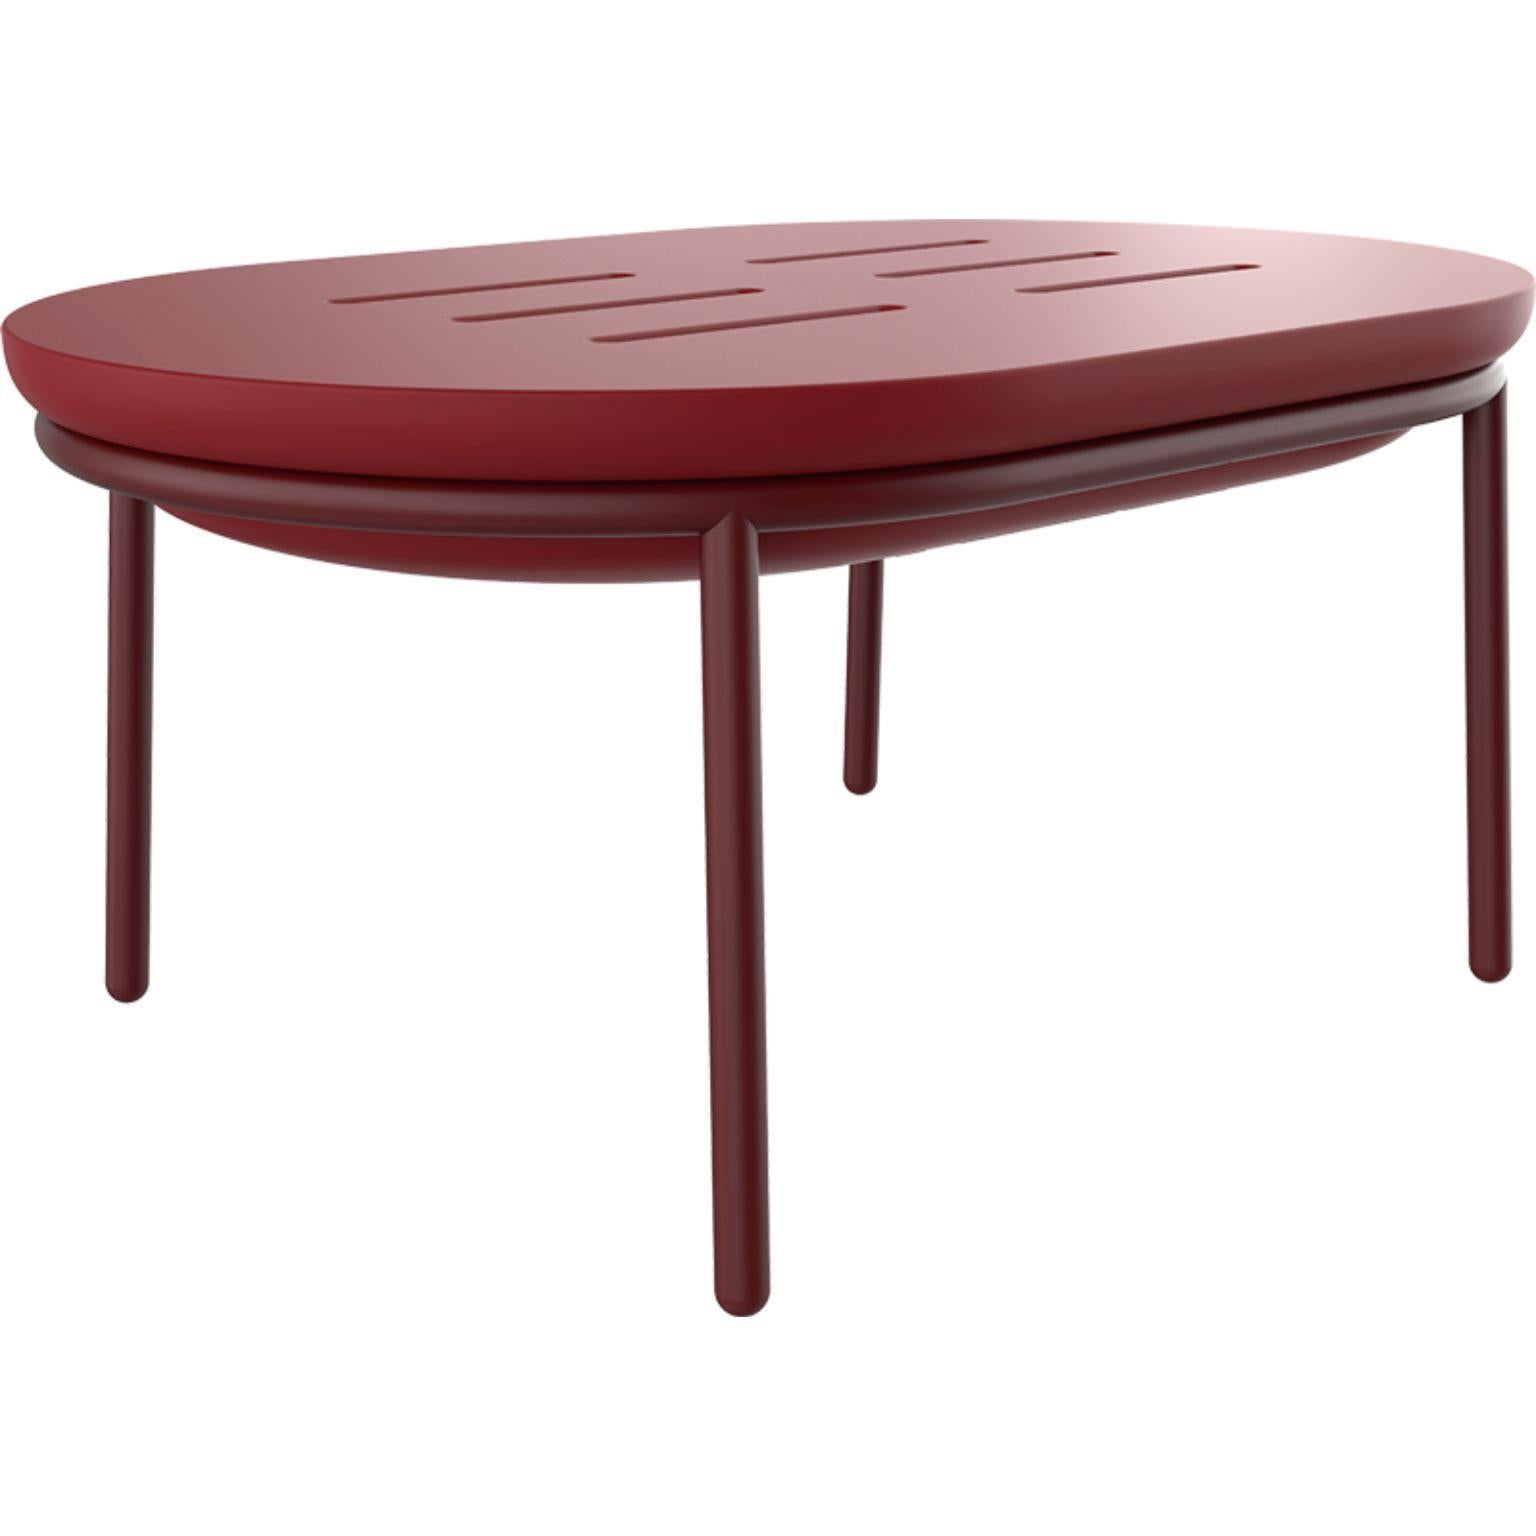 Lace Burgundy 90 low table by Mowee
Dimensions: D 60 x W 90 x H 41 cm
Material: Polyethylene and stainless steel.
Weight: 9.2 kg
Also available in different colors and finishes (lacquered).

Lace is a collection of furniture made by